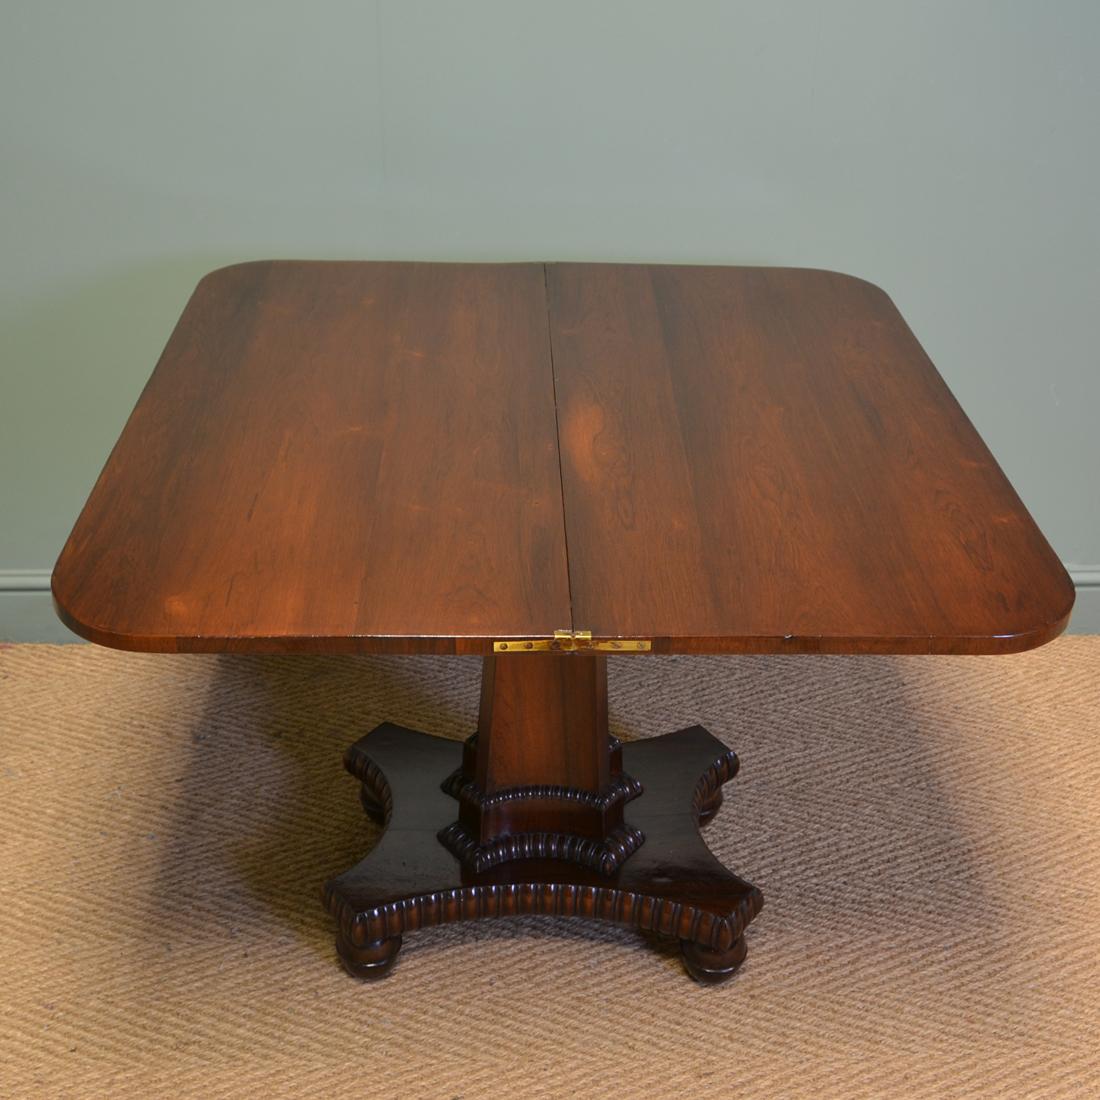 Striking William IV rosewood antique tea table

Full of beautiful charm and character and dating from circa 1835, this striking rosewood tea table has a beautifully figured top that swivels open to double the size. This sits above an unusual